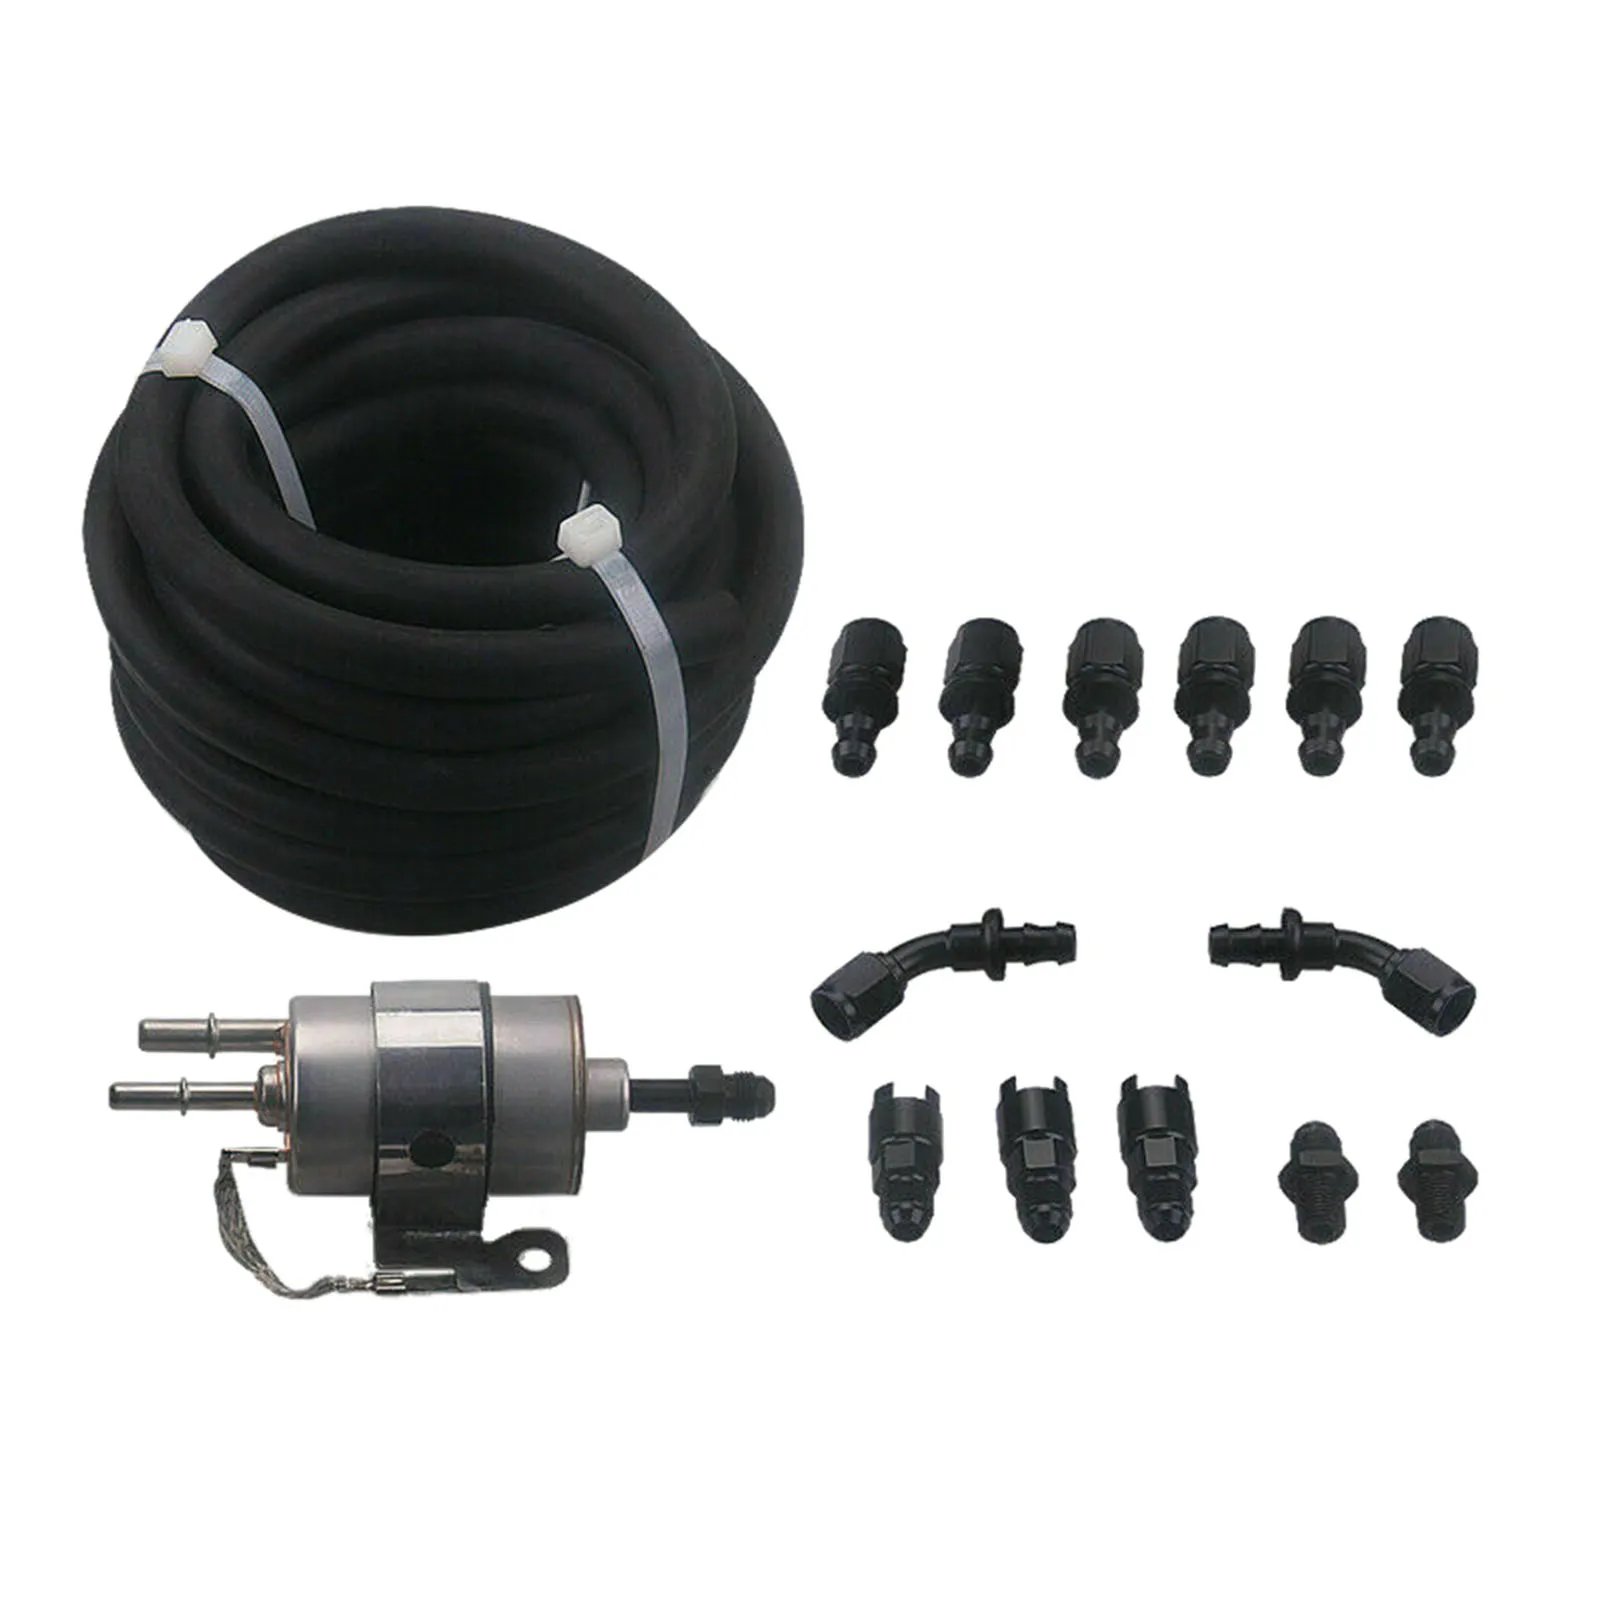 7.5m Fuel Injection Line Adapter Pressure Regulator Fuel Filter Set Direct Replaces for LS